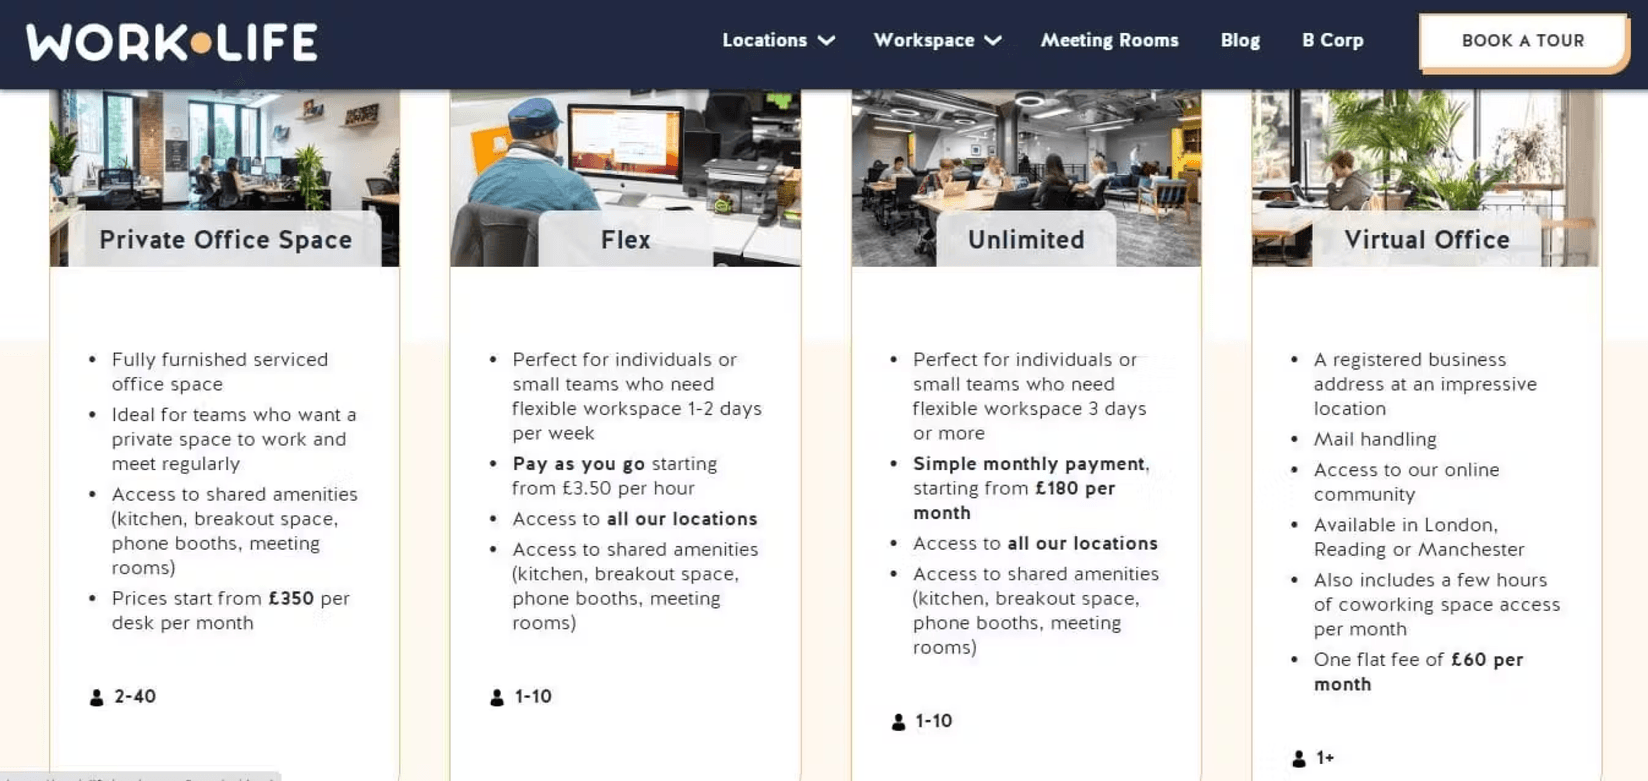 Pricing plans at work.life coworking space